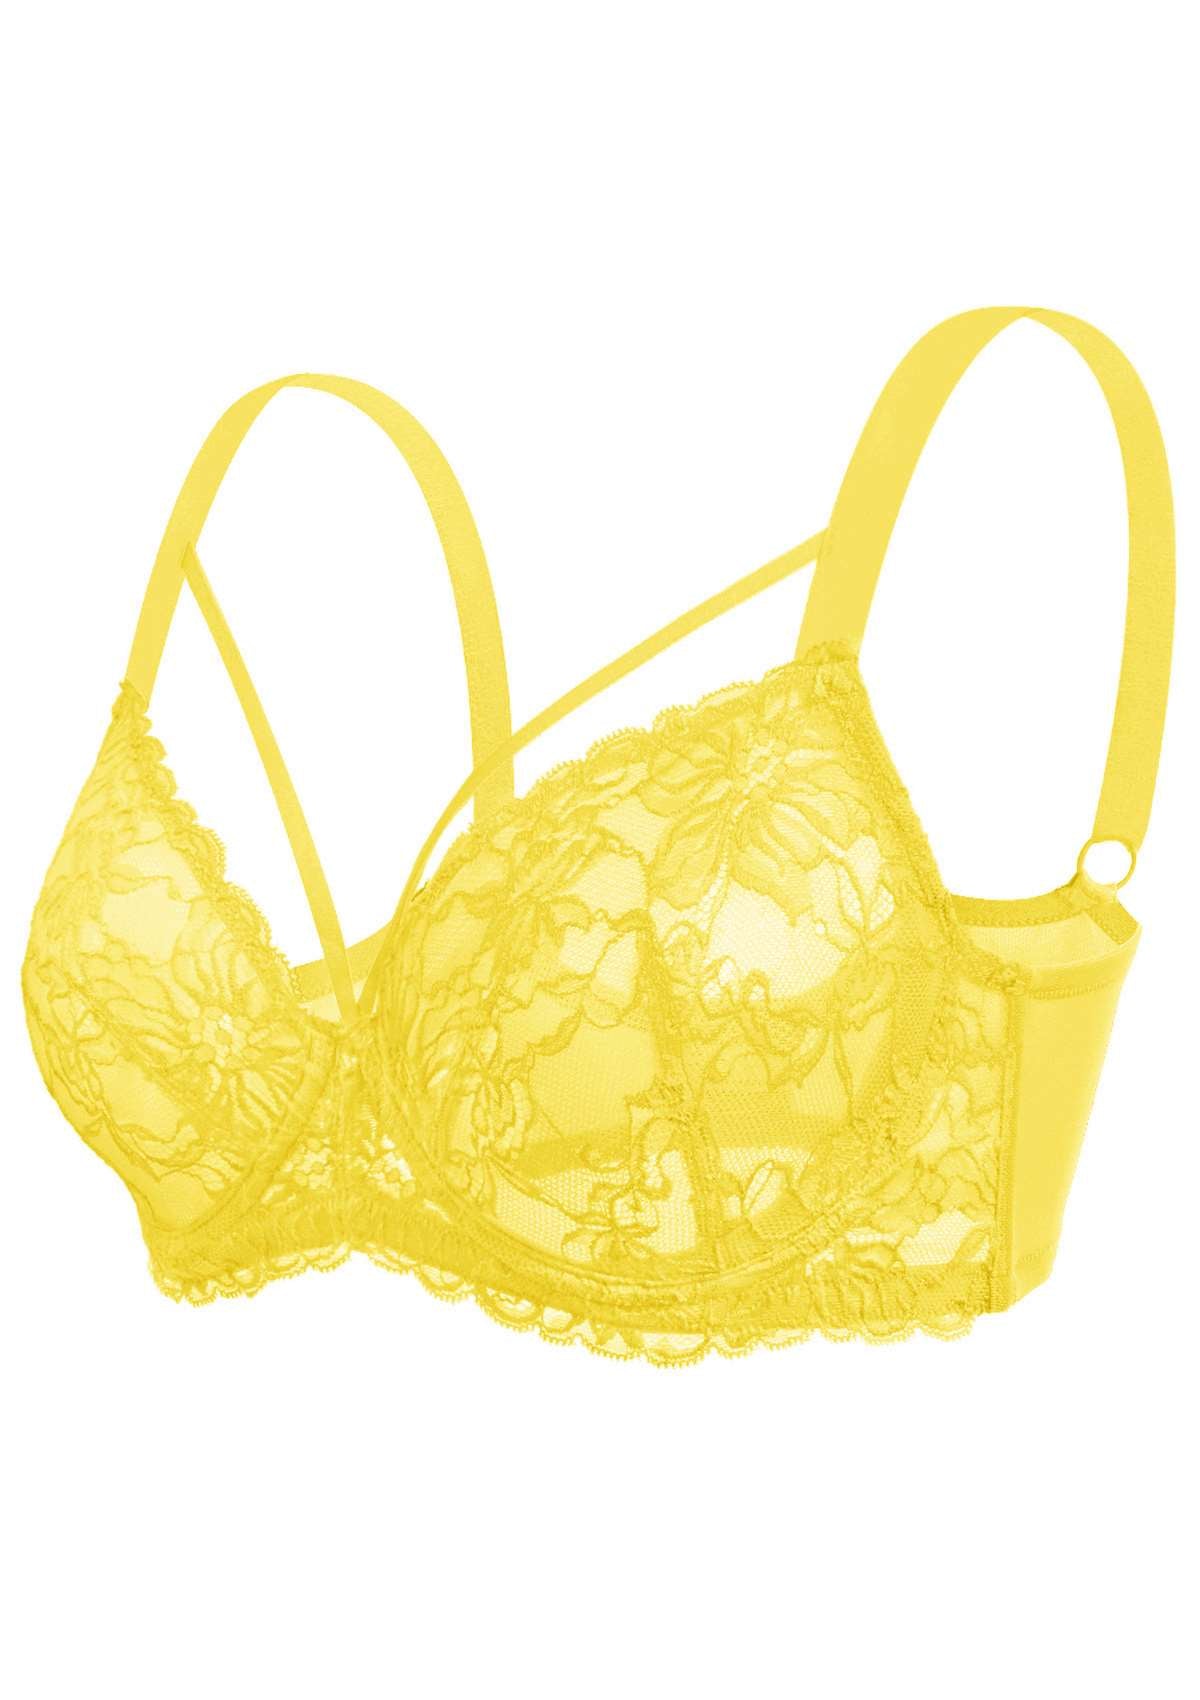 HSIA Unlined Lace Mesh Minimizer Bra For Large Breasts, Full Coverage - Bright Yellow / 34 / DDD/F